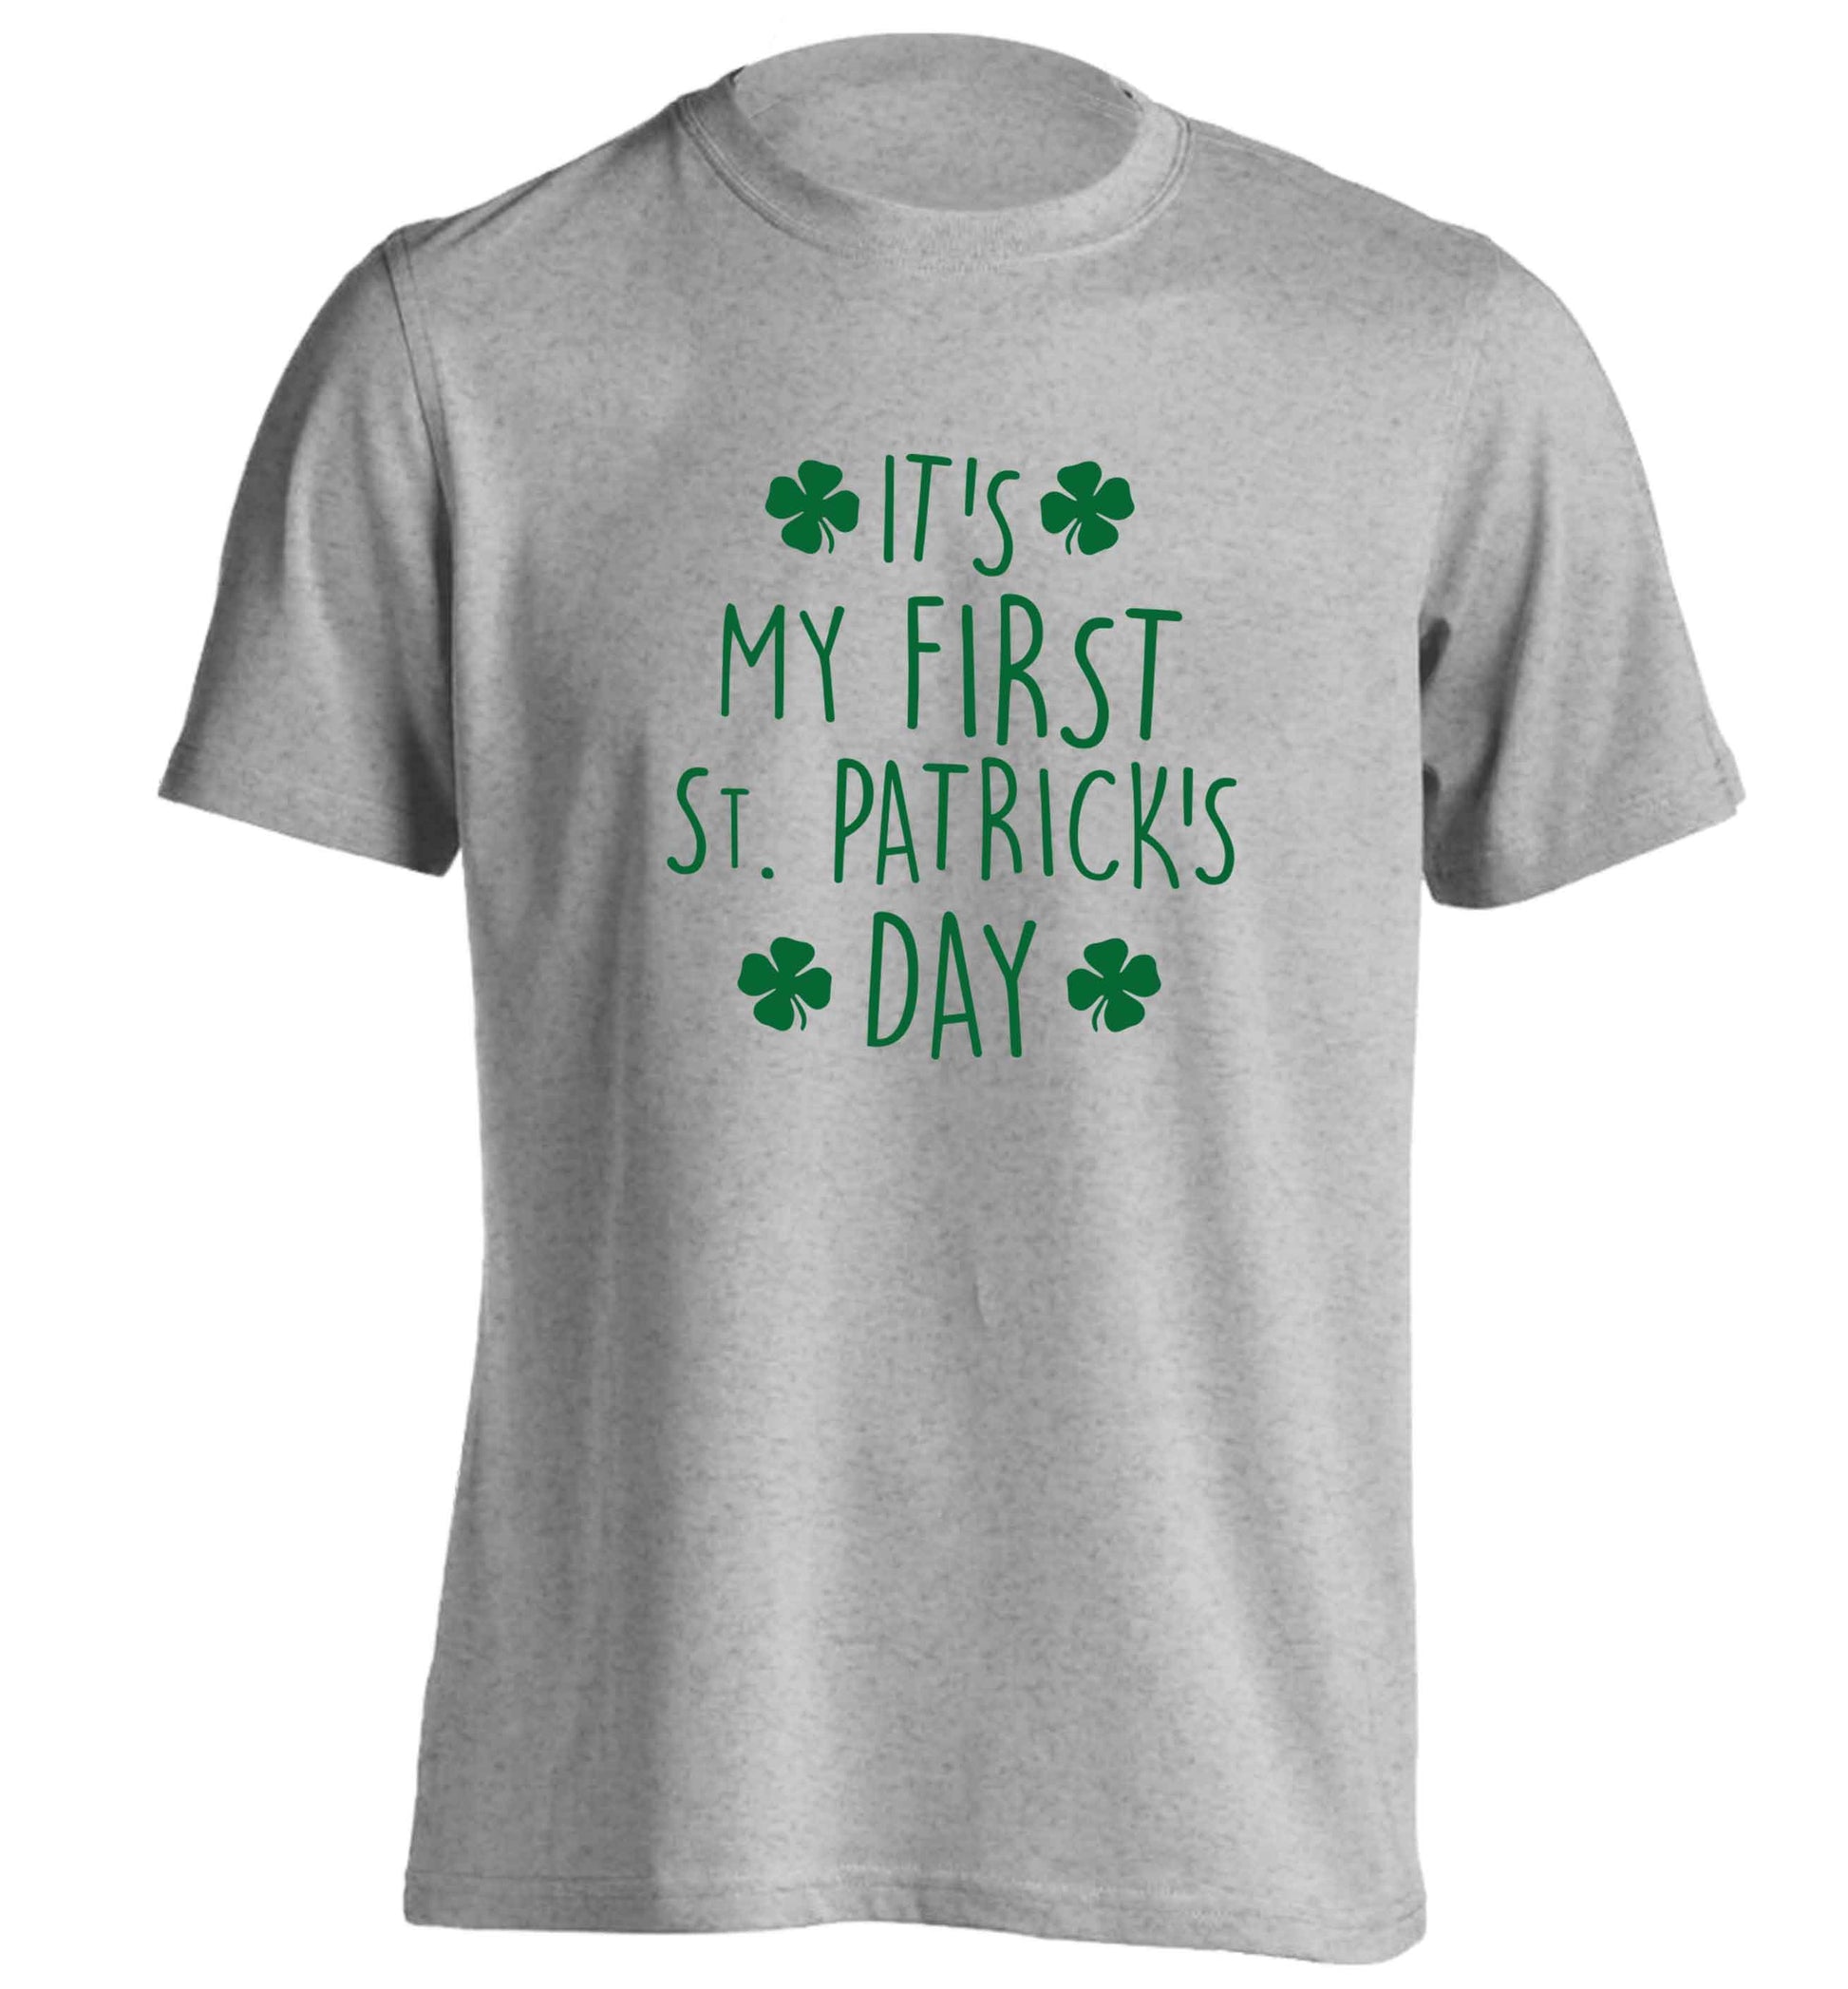 It's my first St.Patrick's day adults unisex grey Tshirt 2XL